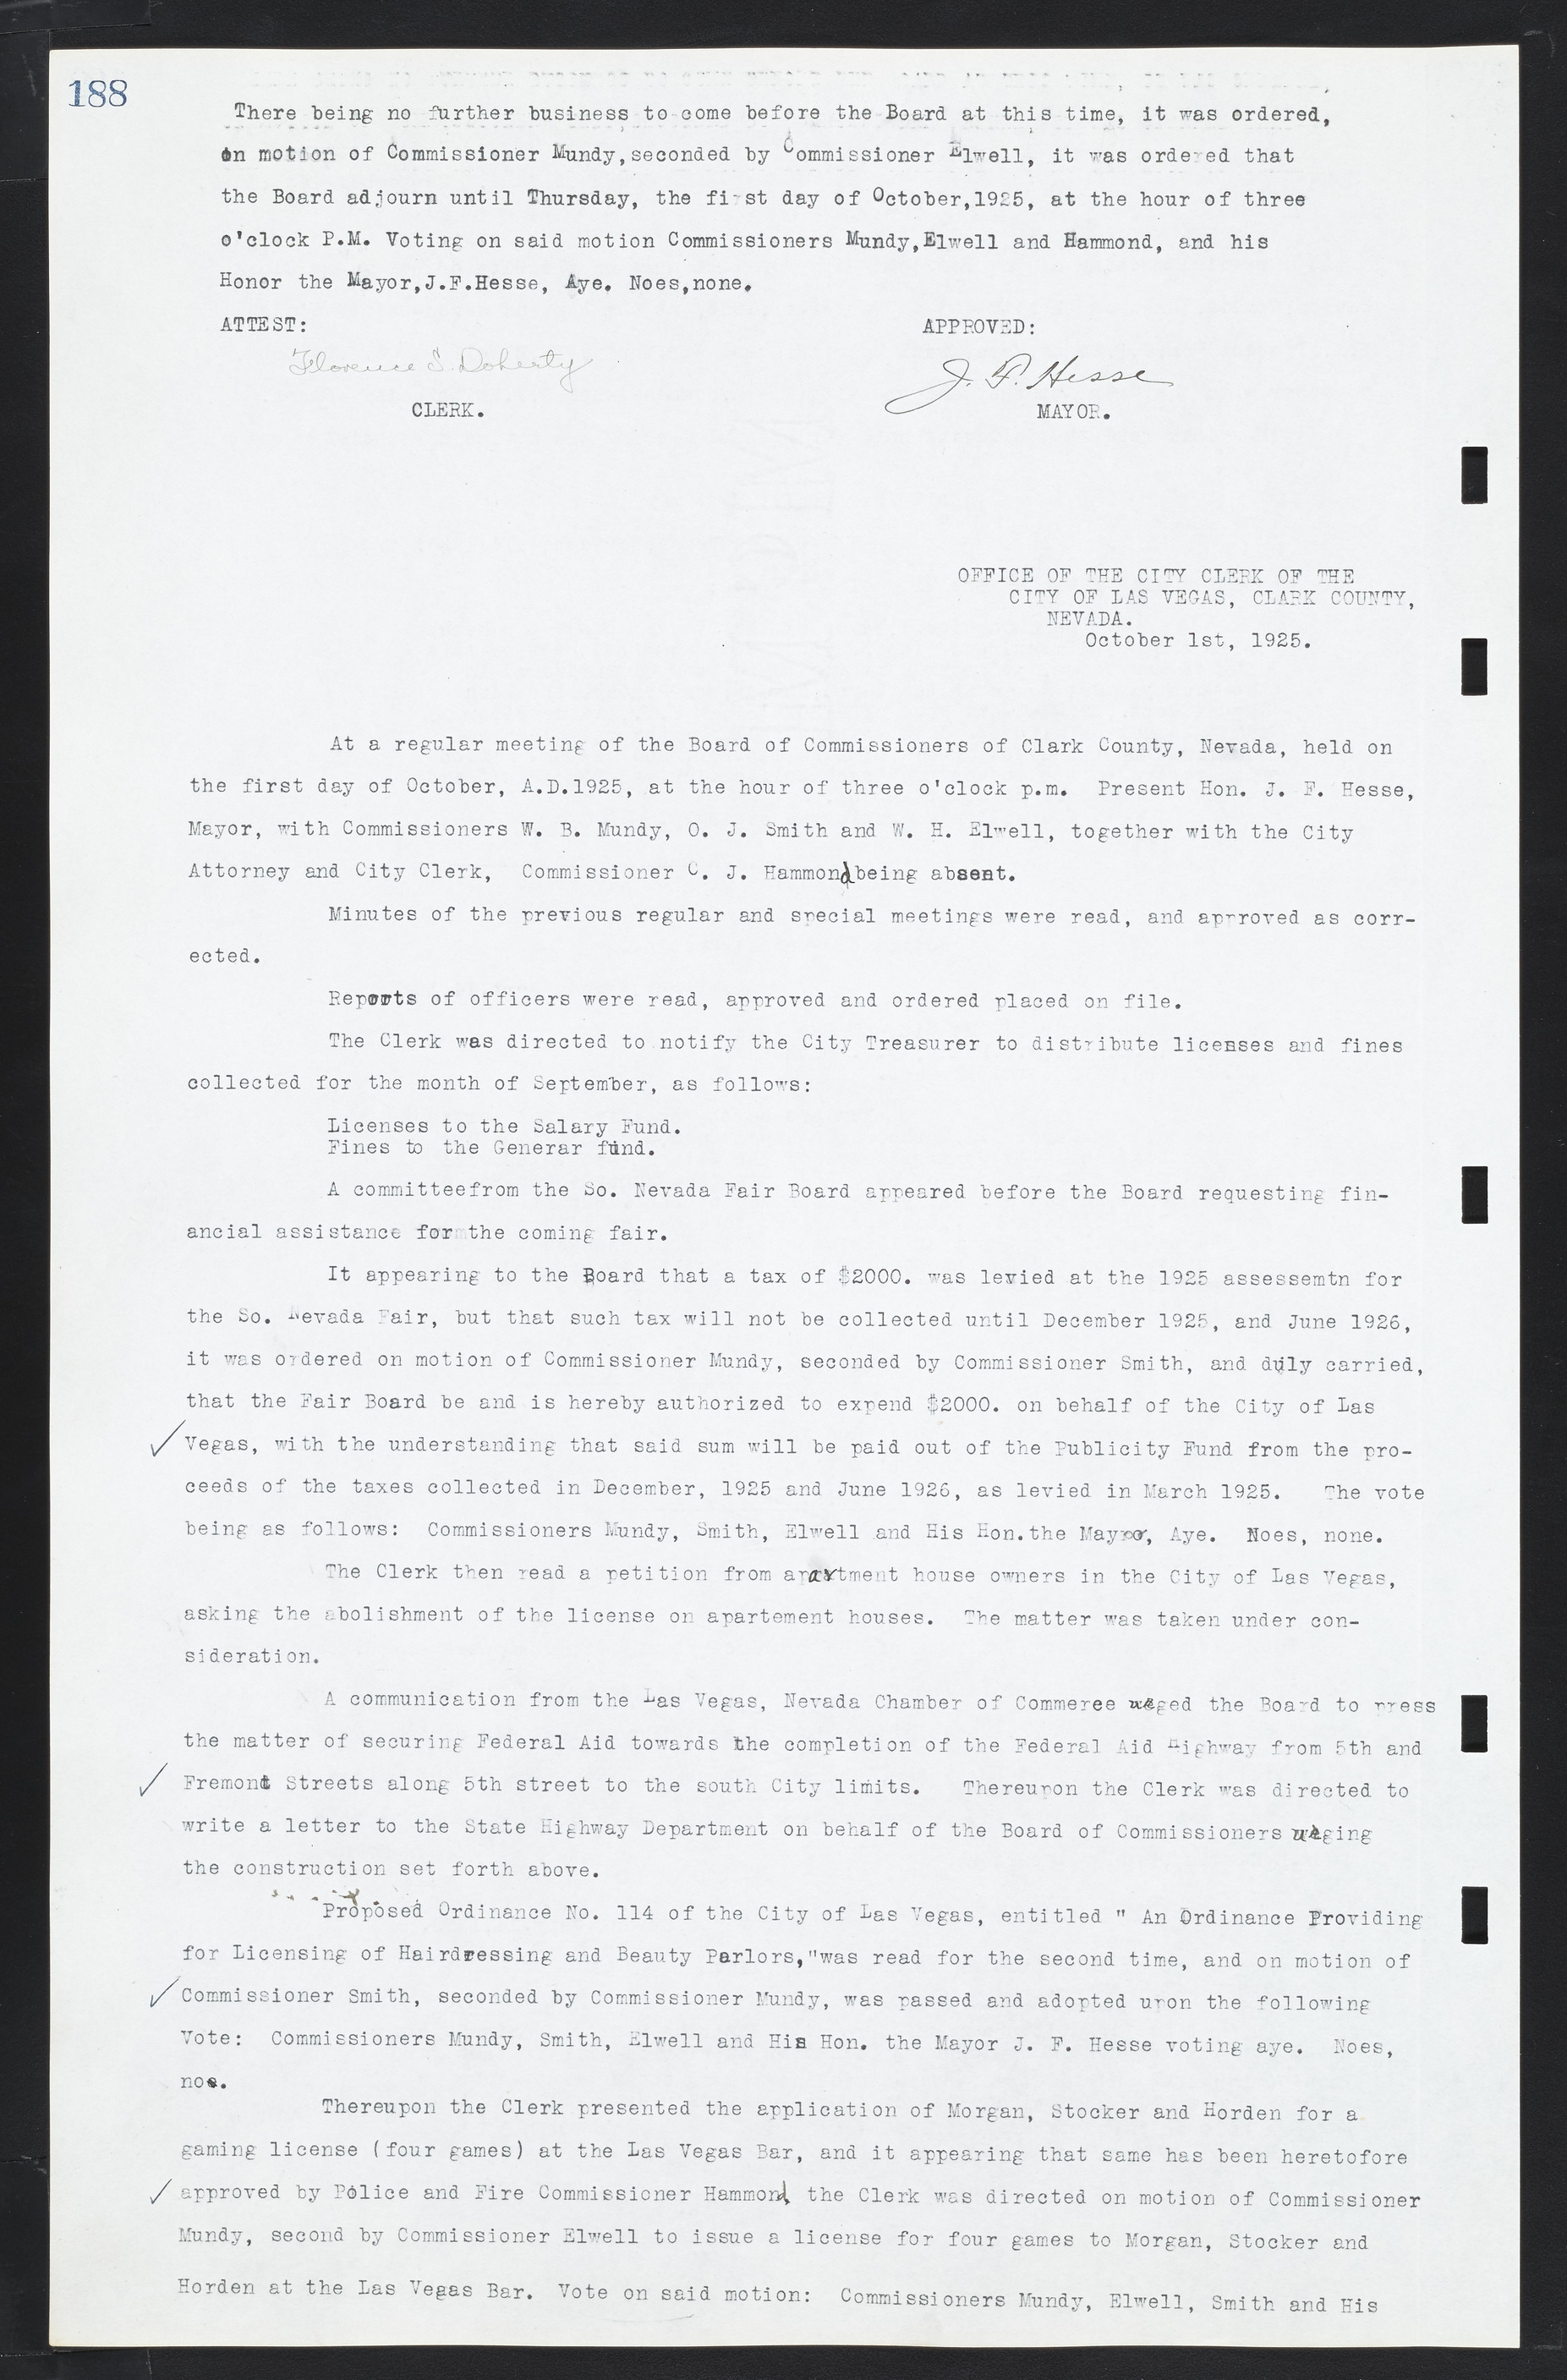 Las Vegas City Commission Minutes, March 1, 1922 to May 10, 1929, lvc000002-195